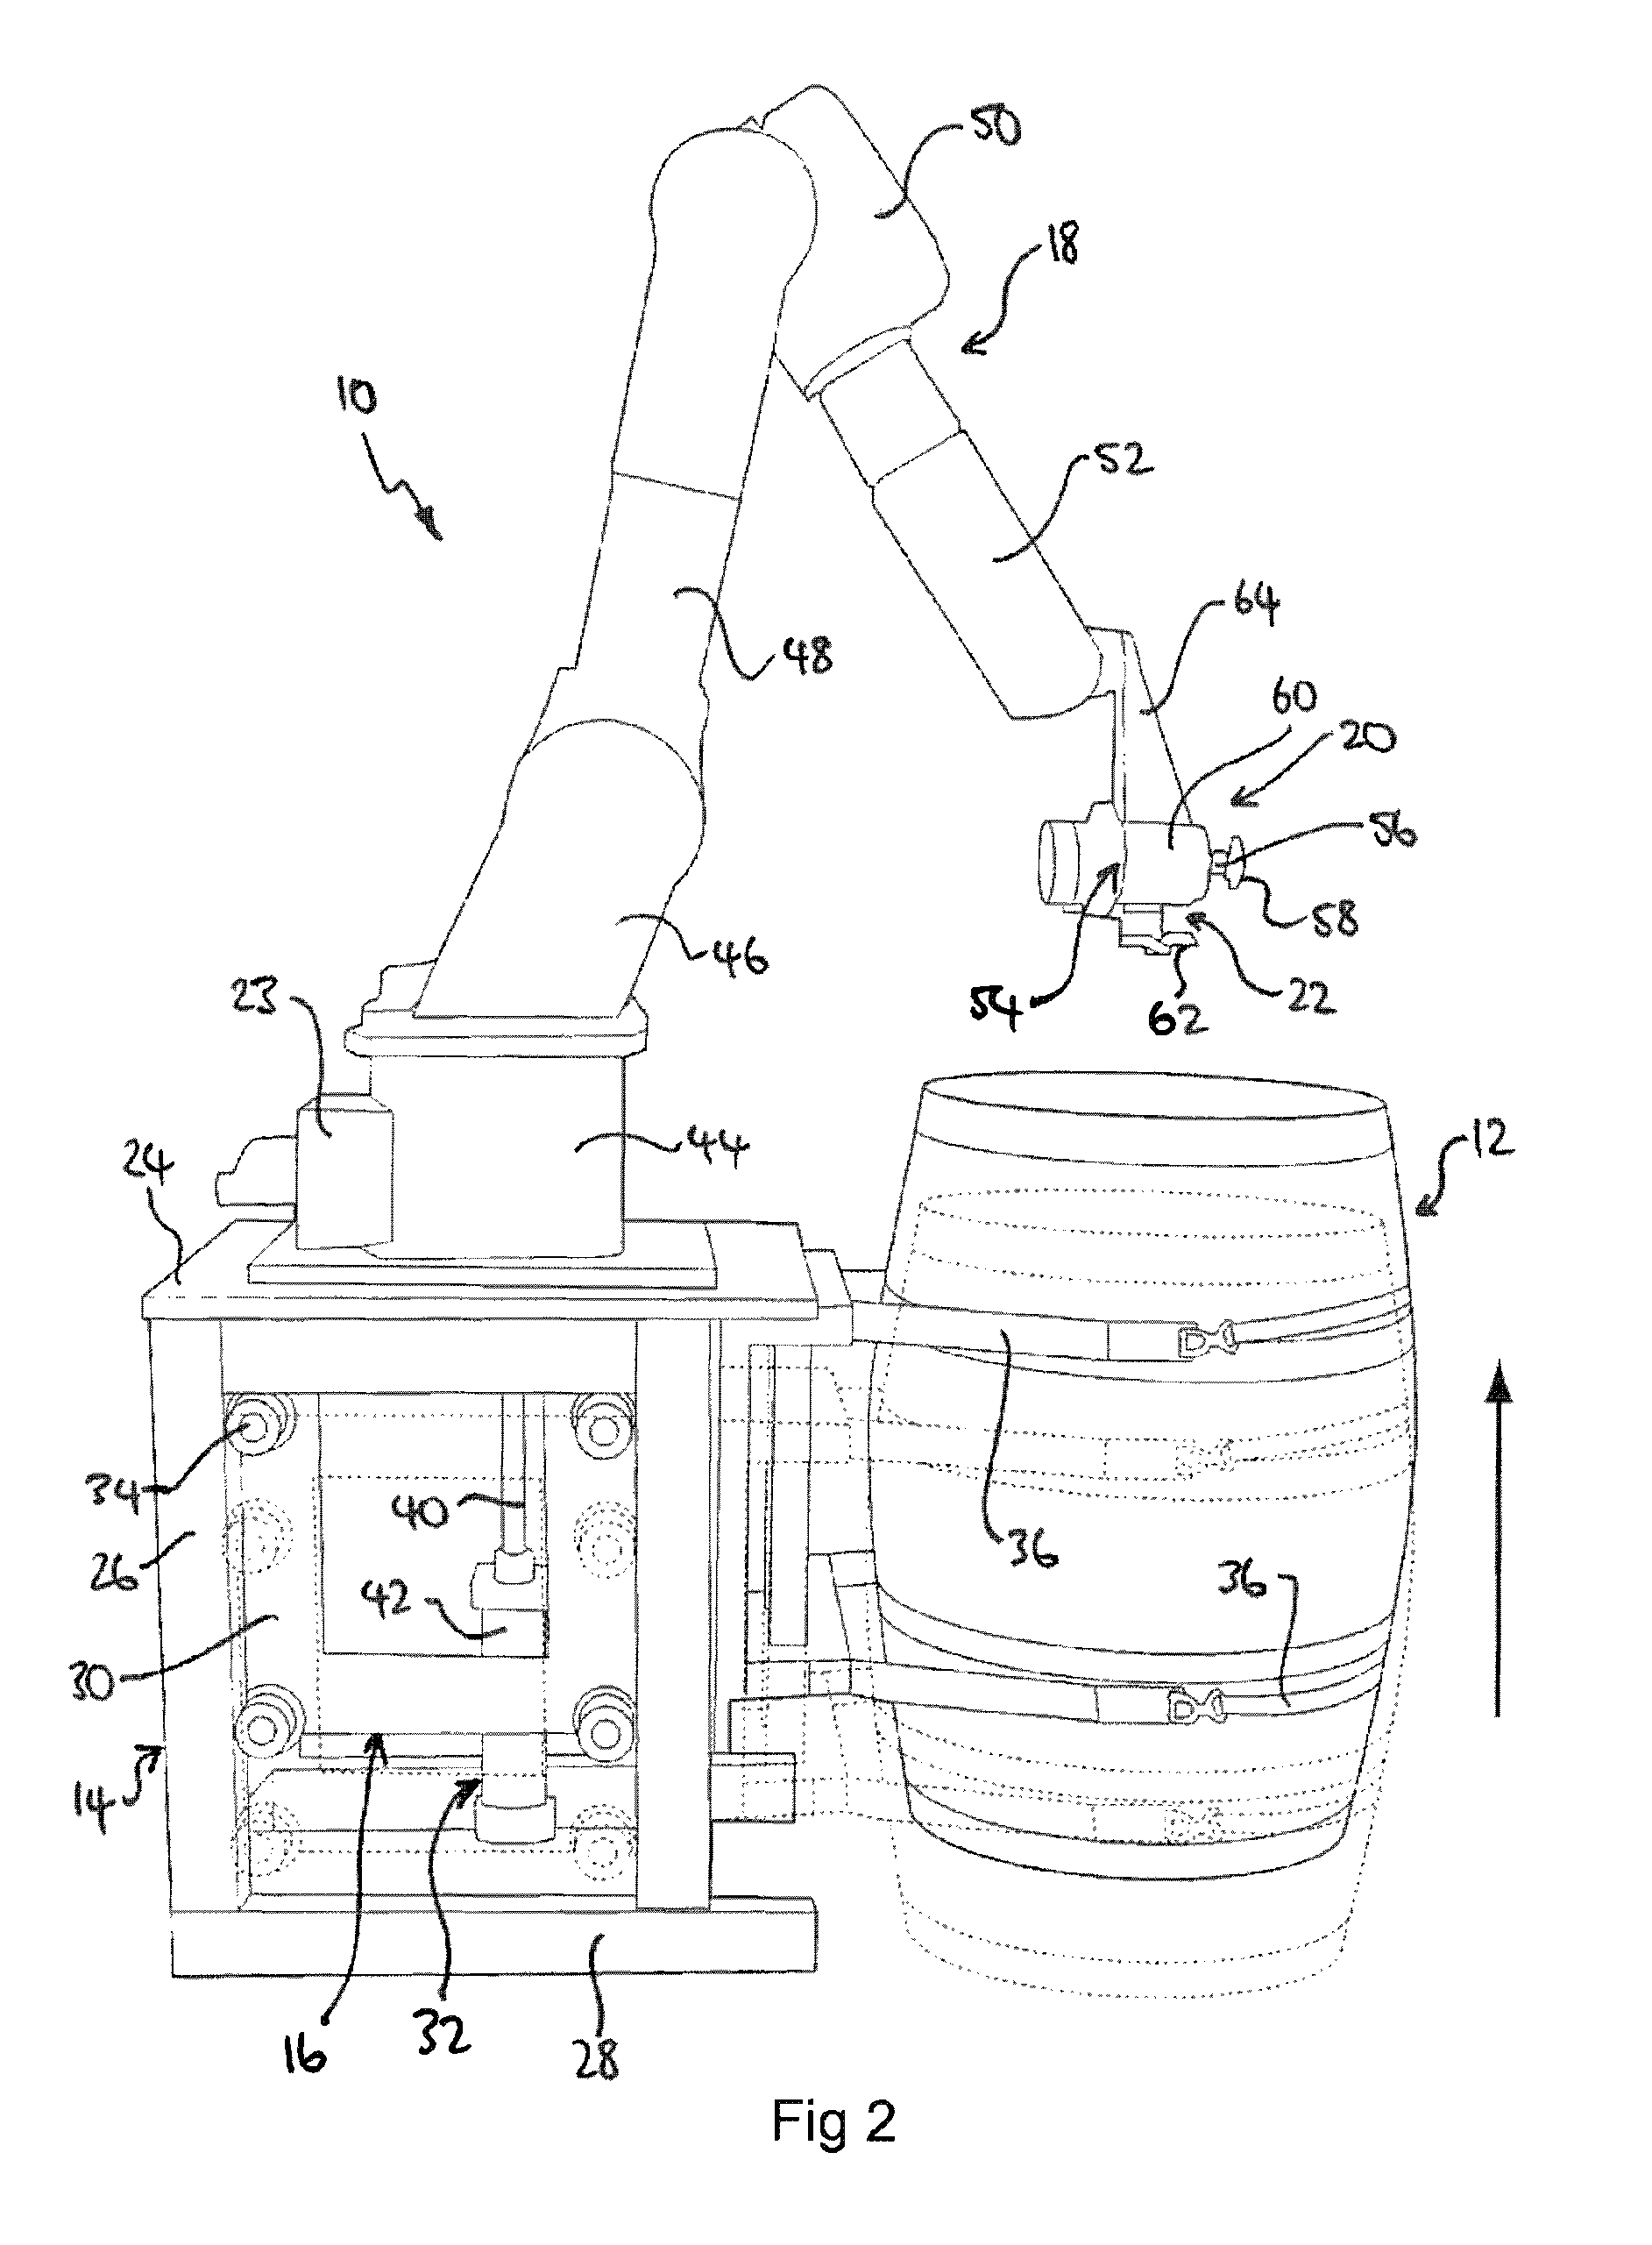 Apparatus and method for shaving the inside of barrels